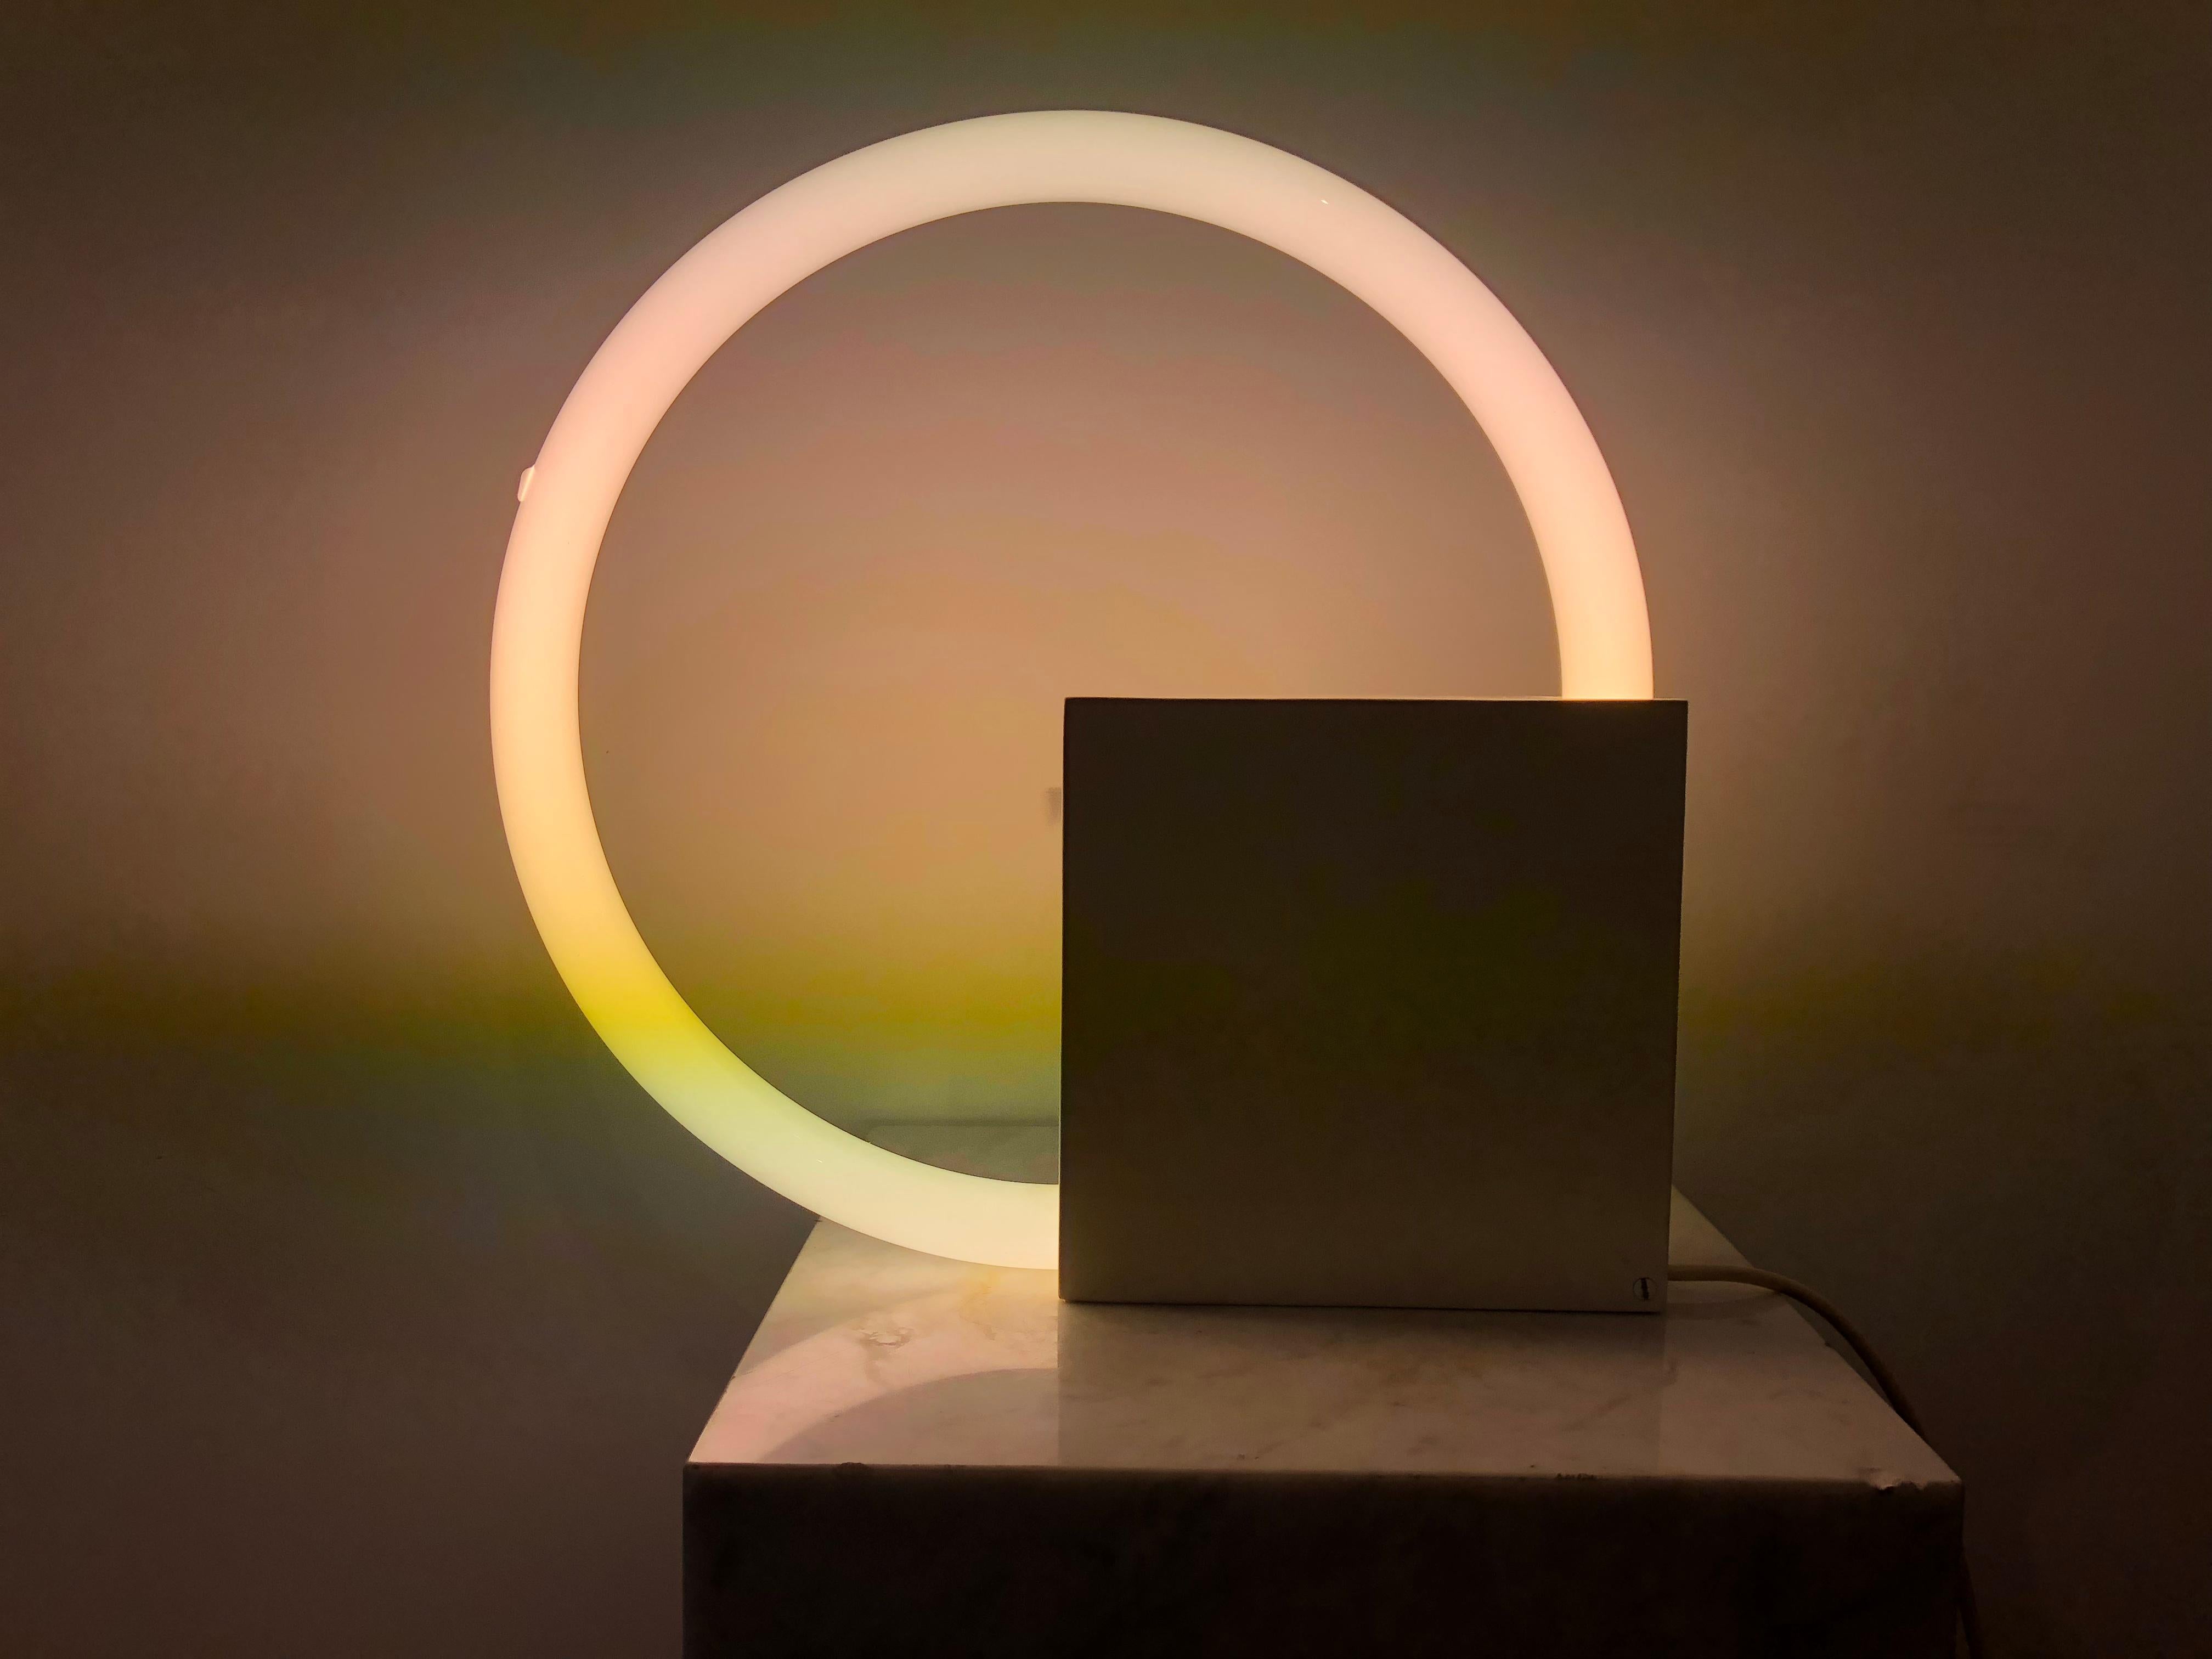 Table lamp (or also wall lamp) made of painted steel and round neon.
Inspired by the minimalism aesthetics movement, the Dutch designer Aldo van den Nieuwelaar combined the simplicity and purity of forms in a lightning sculpture.